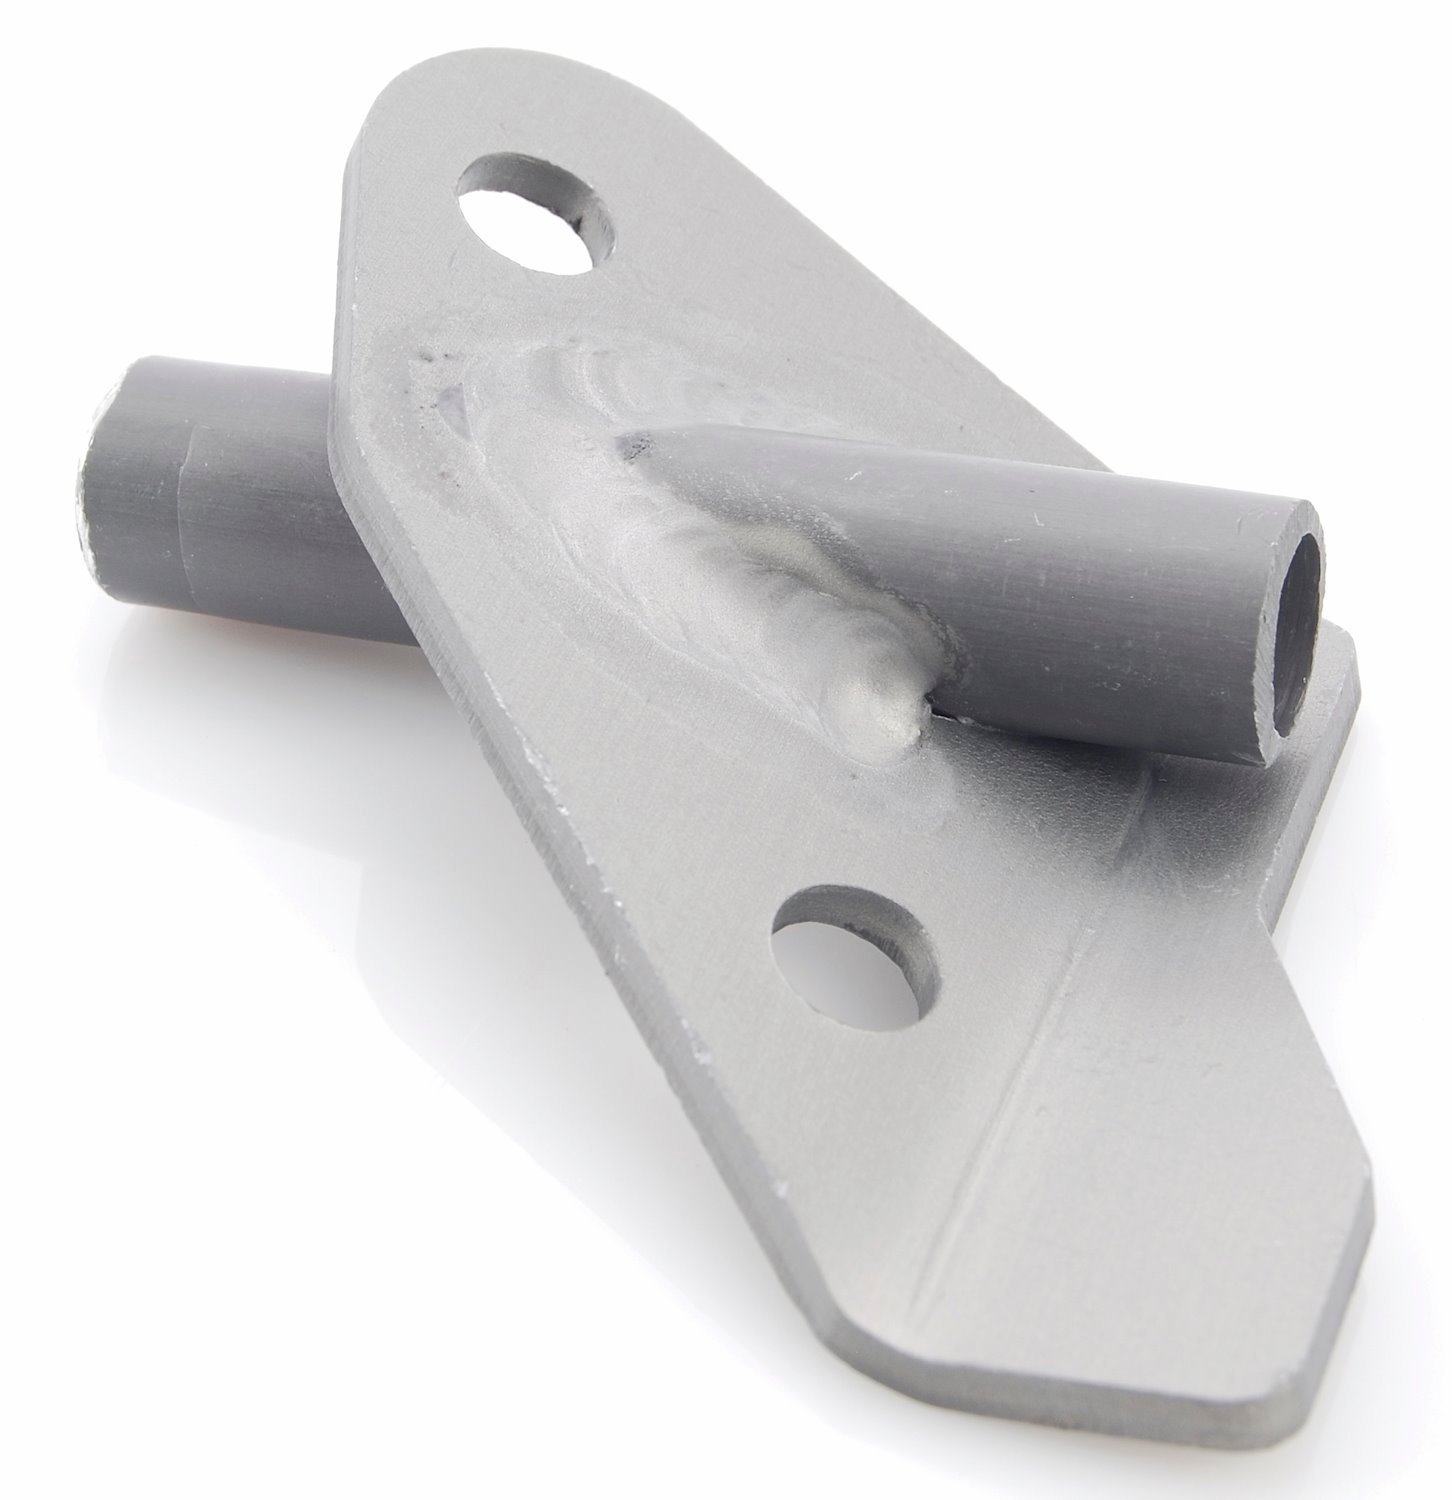 Accelerator Pedal Rod Support (Only) Clear anodized aluminum pedal rod support Fits: